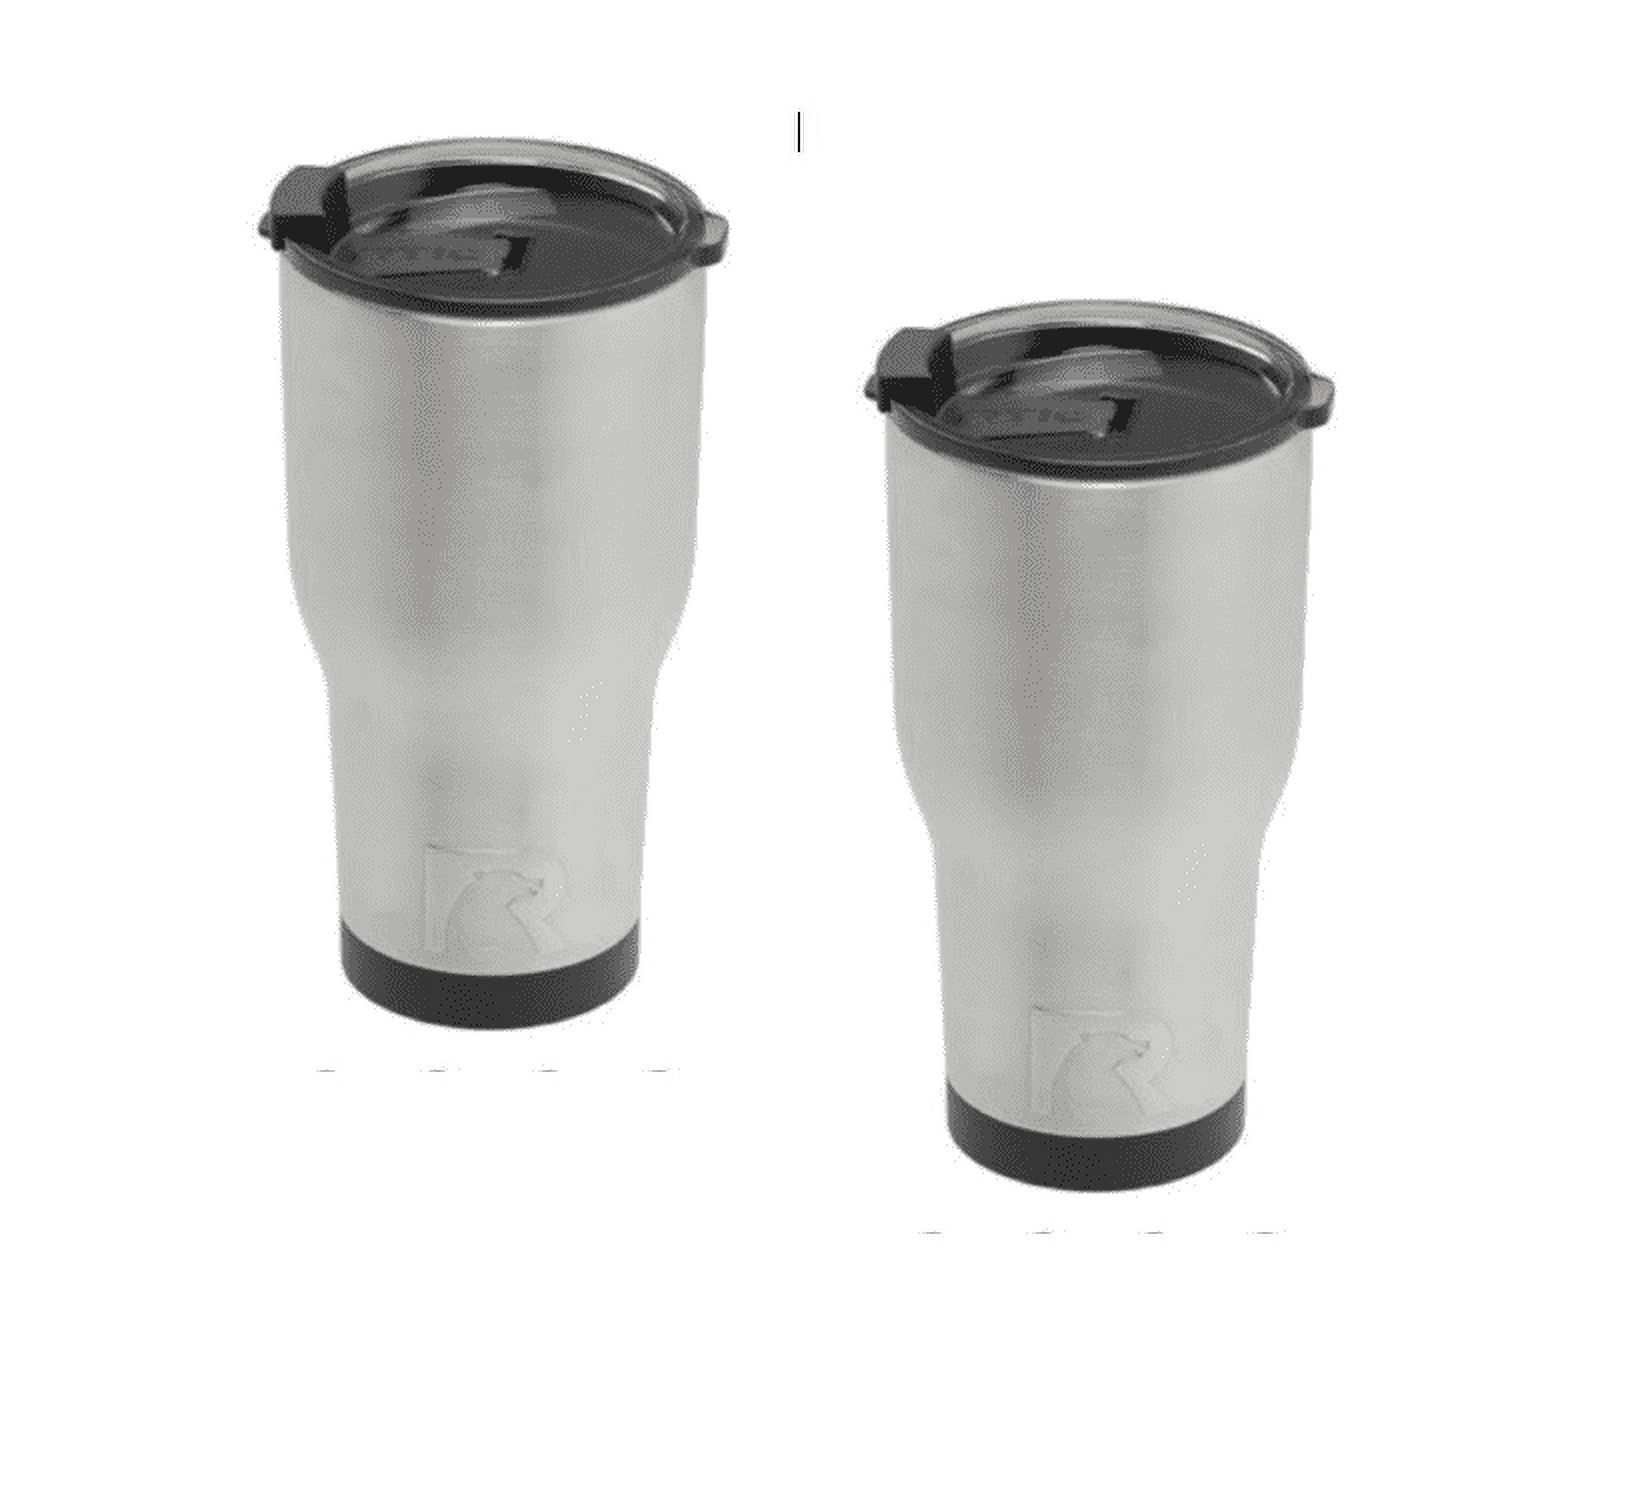 RTIC 30 oz. Thermal Tumbler Stainless Cup Coffee Mug Cold or Hot  RTIC30TUMBLER - Bed Bath & Beyond - 18108307